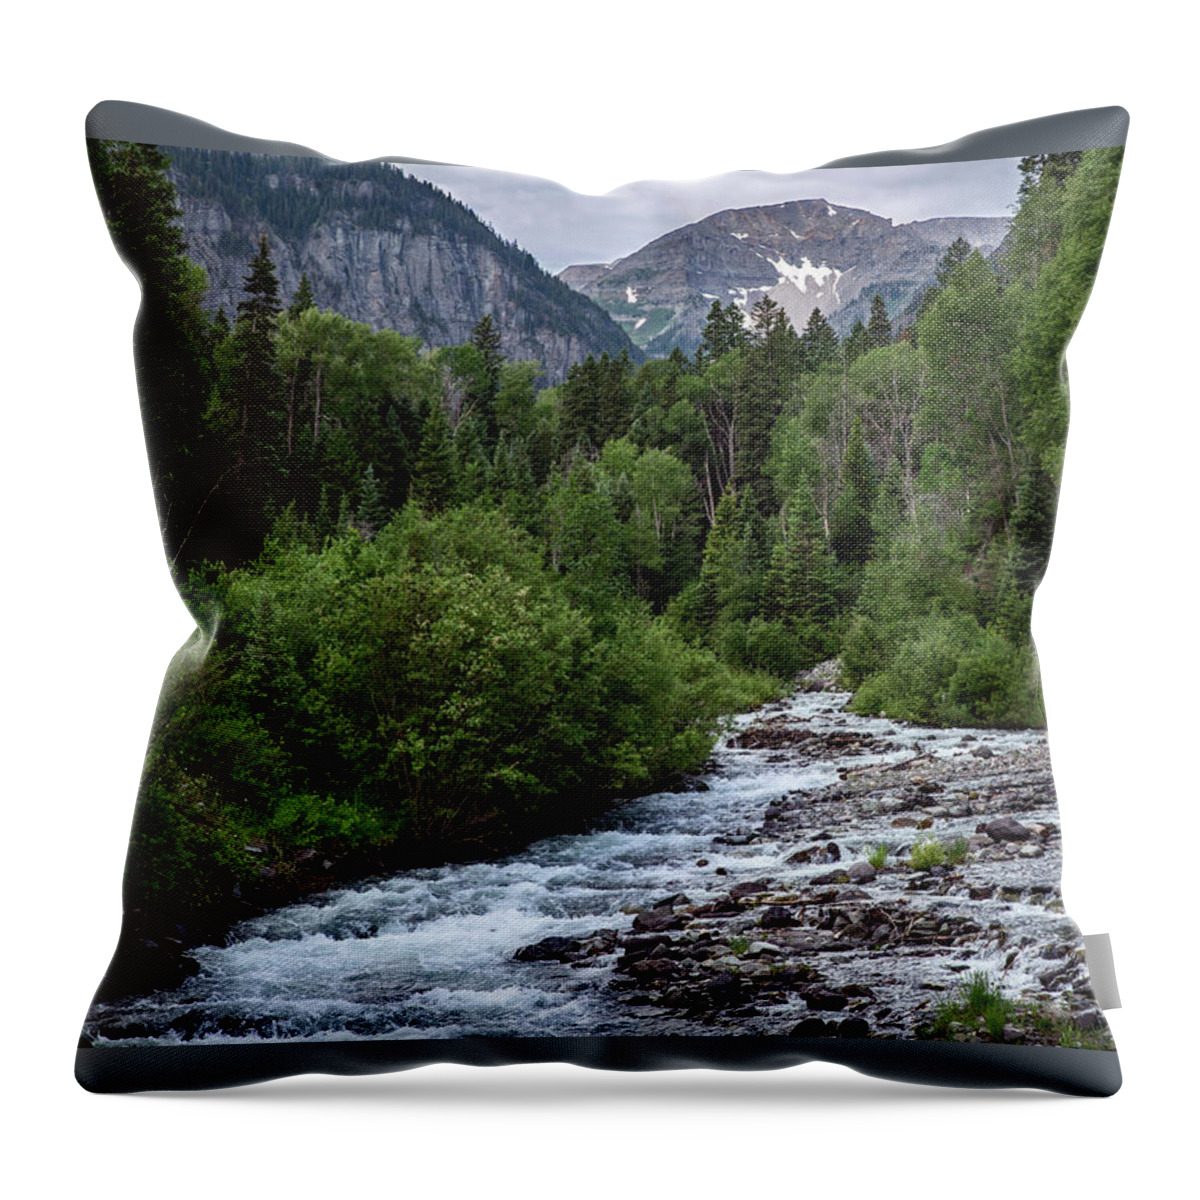 Landscape Throw Pillow featuring the photograph Mountain Stream in the San Juans by Melany Sarafis